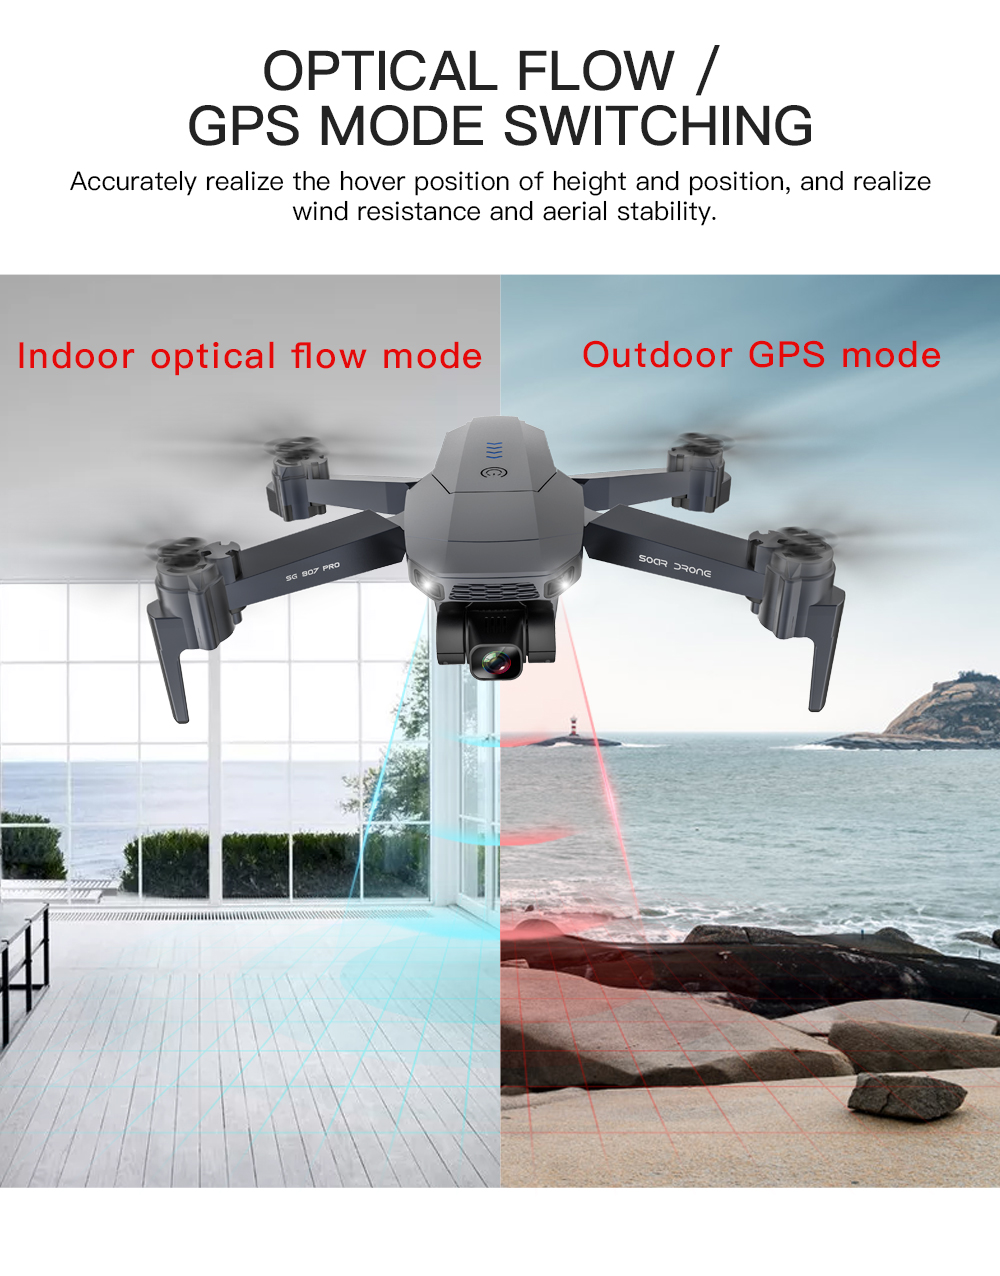 ZLL SG907 Pro 5G WIFI FPV GPS With 4K HD Dual Camera Two-axis Gimbal Optical Flow Positioning Foldable RC Drone Quadcopter RTF 112